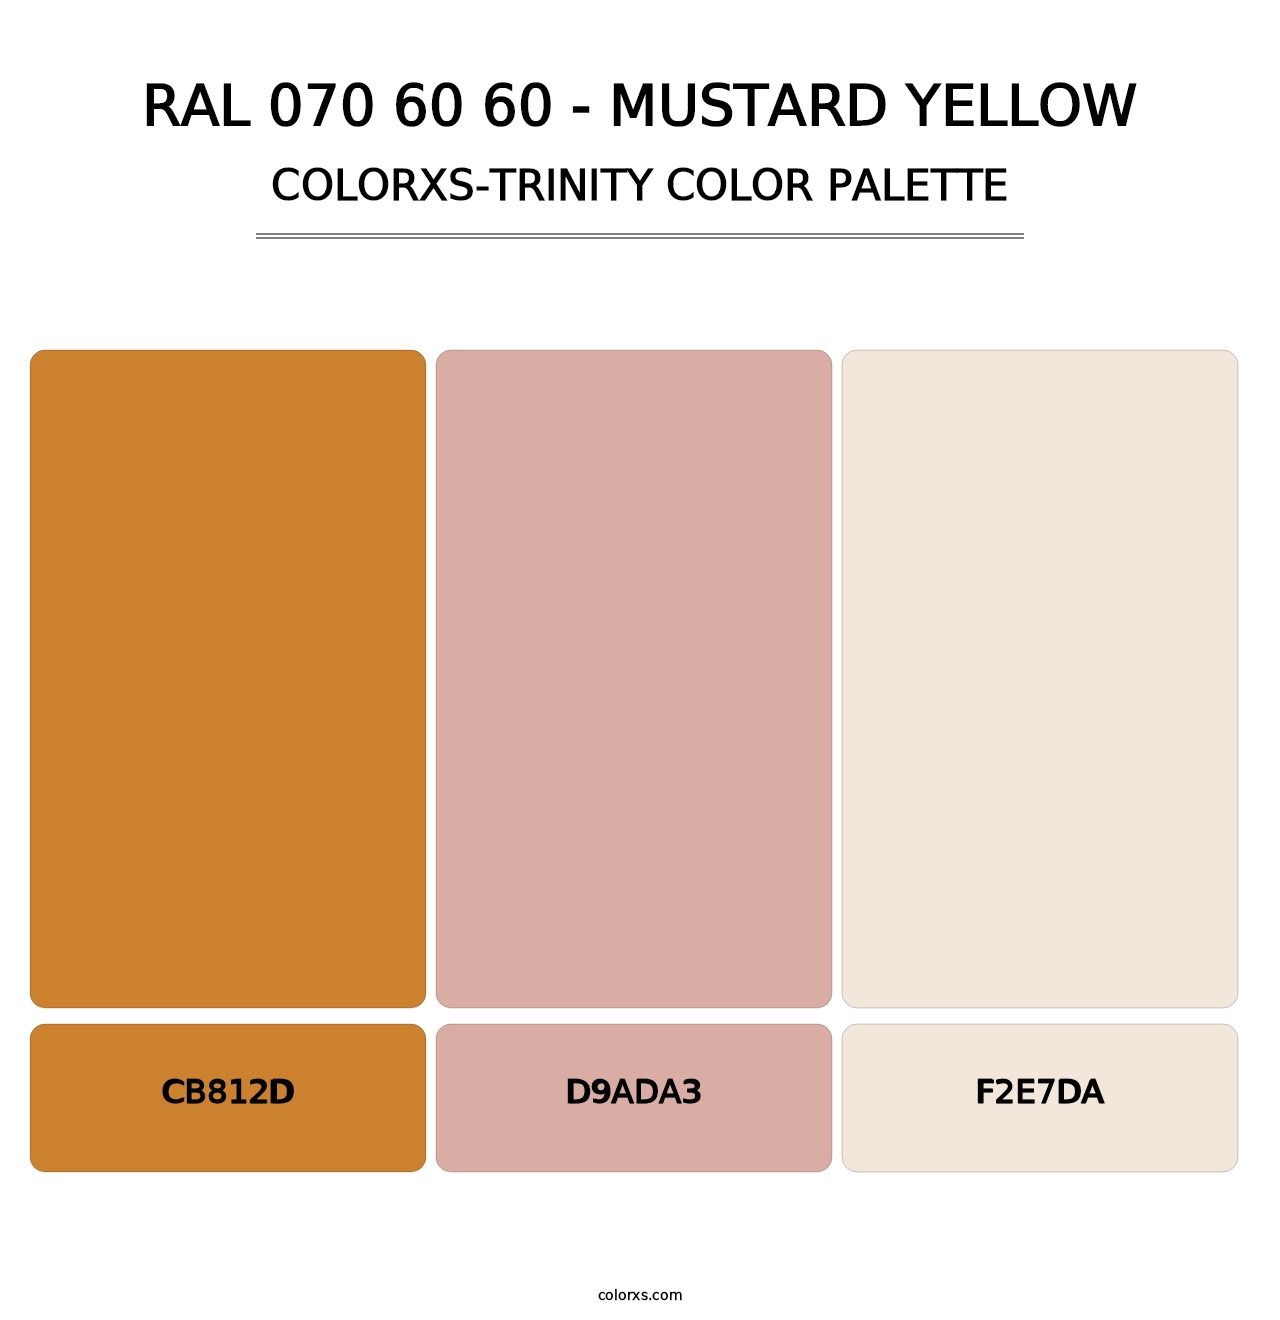 RAL 070 60 60 - Mustard Yellow - Colorxs Trinity Palette